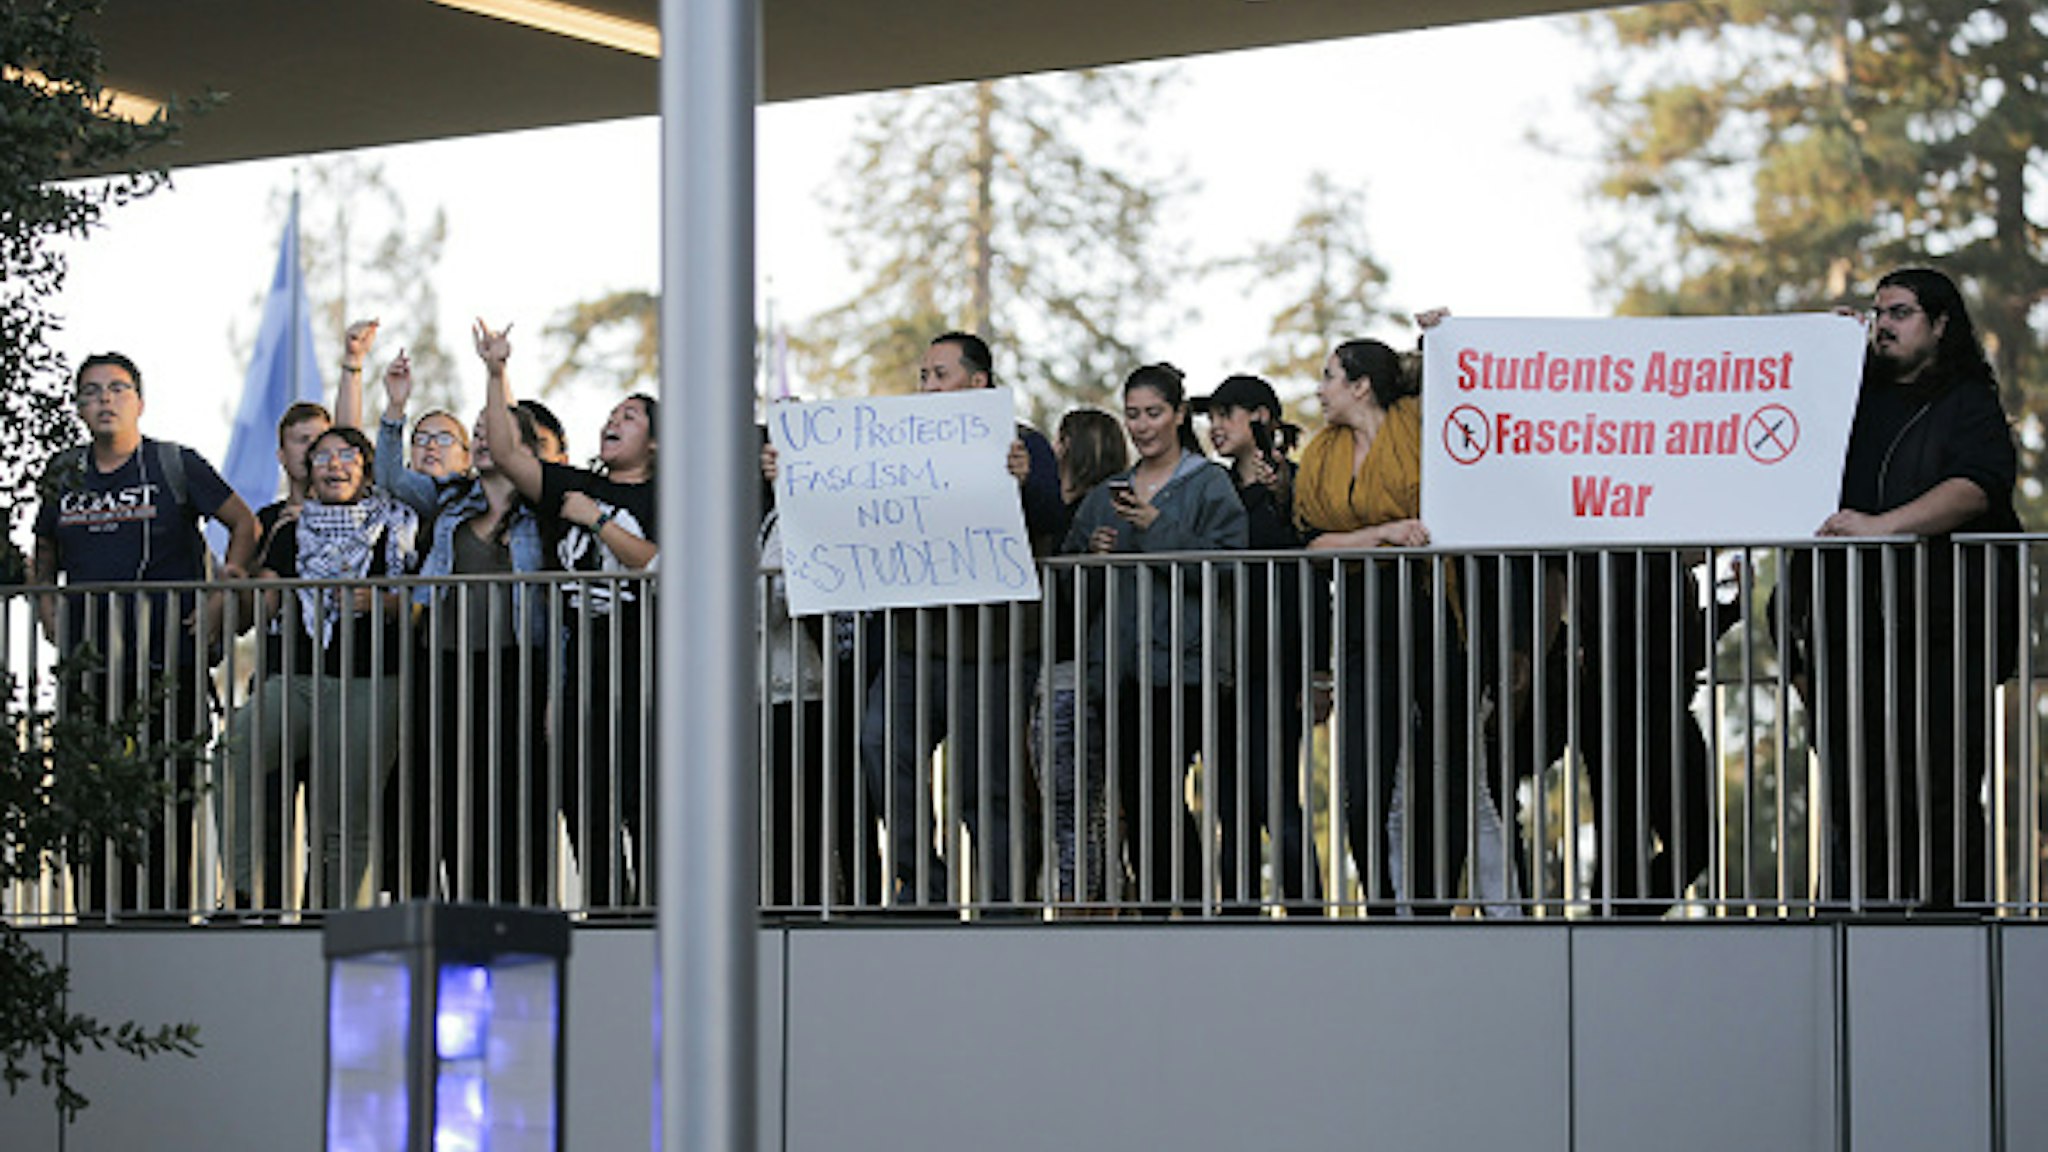 Protestors rally to protest a speech by conservative commentator Ben Shapiro, September 14, 2017, at the University of California, Berkeley. / AFP PHOTO / Elijah Nouvelage